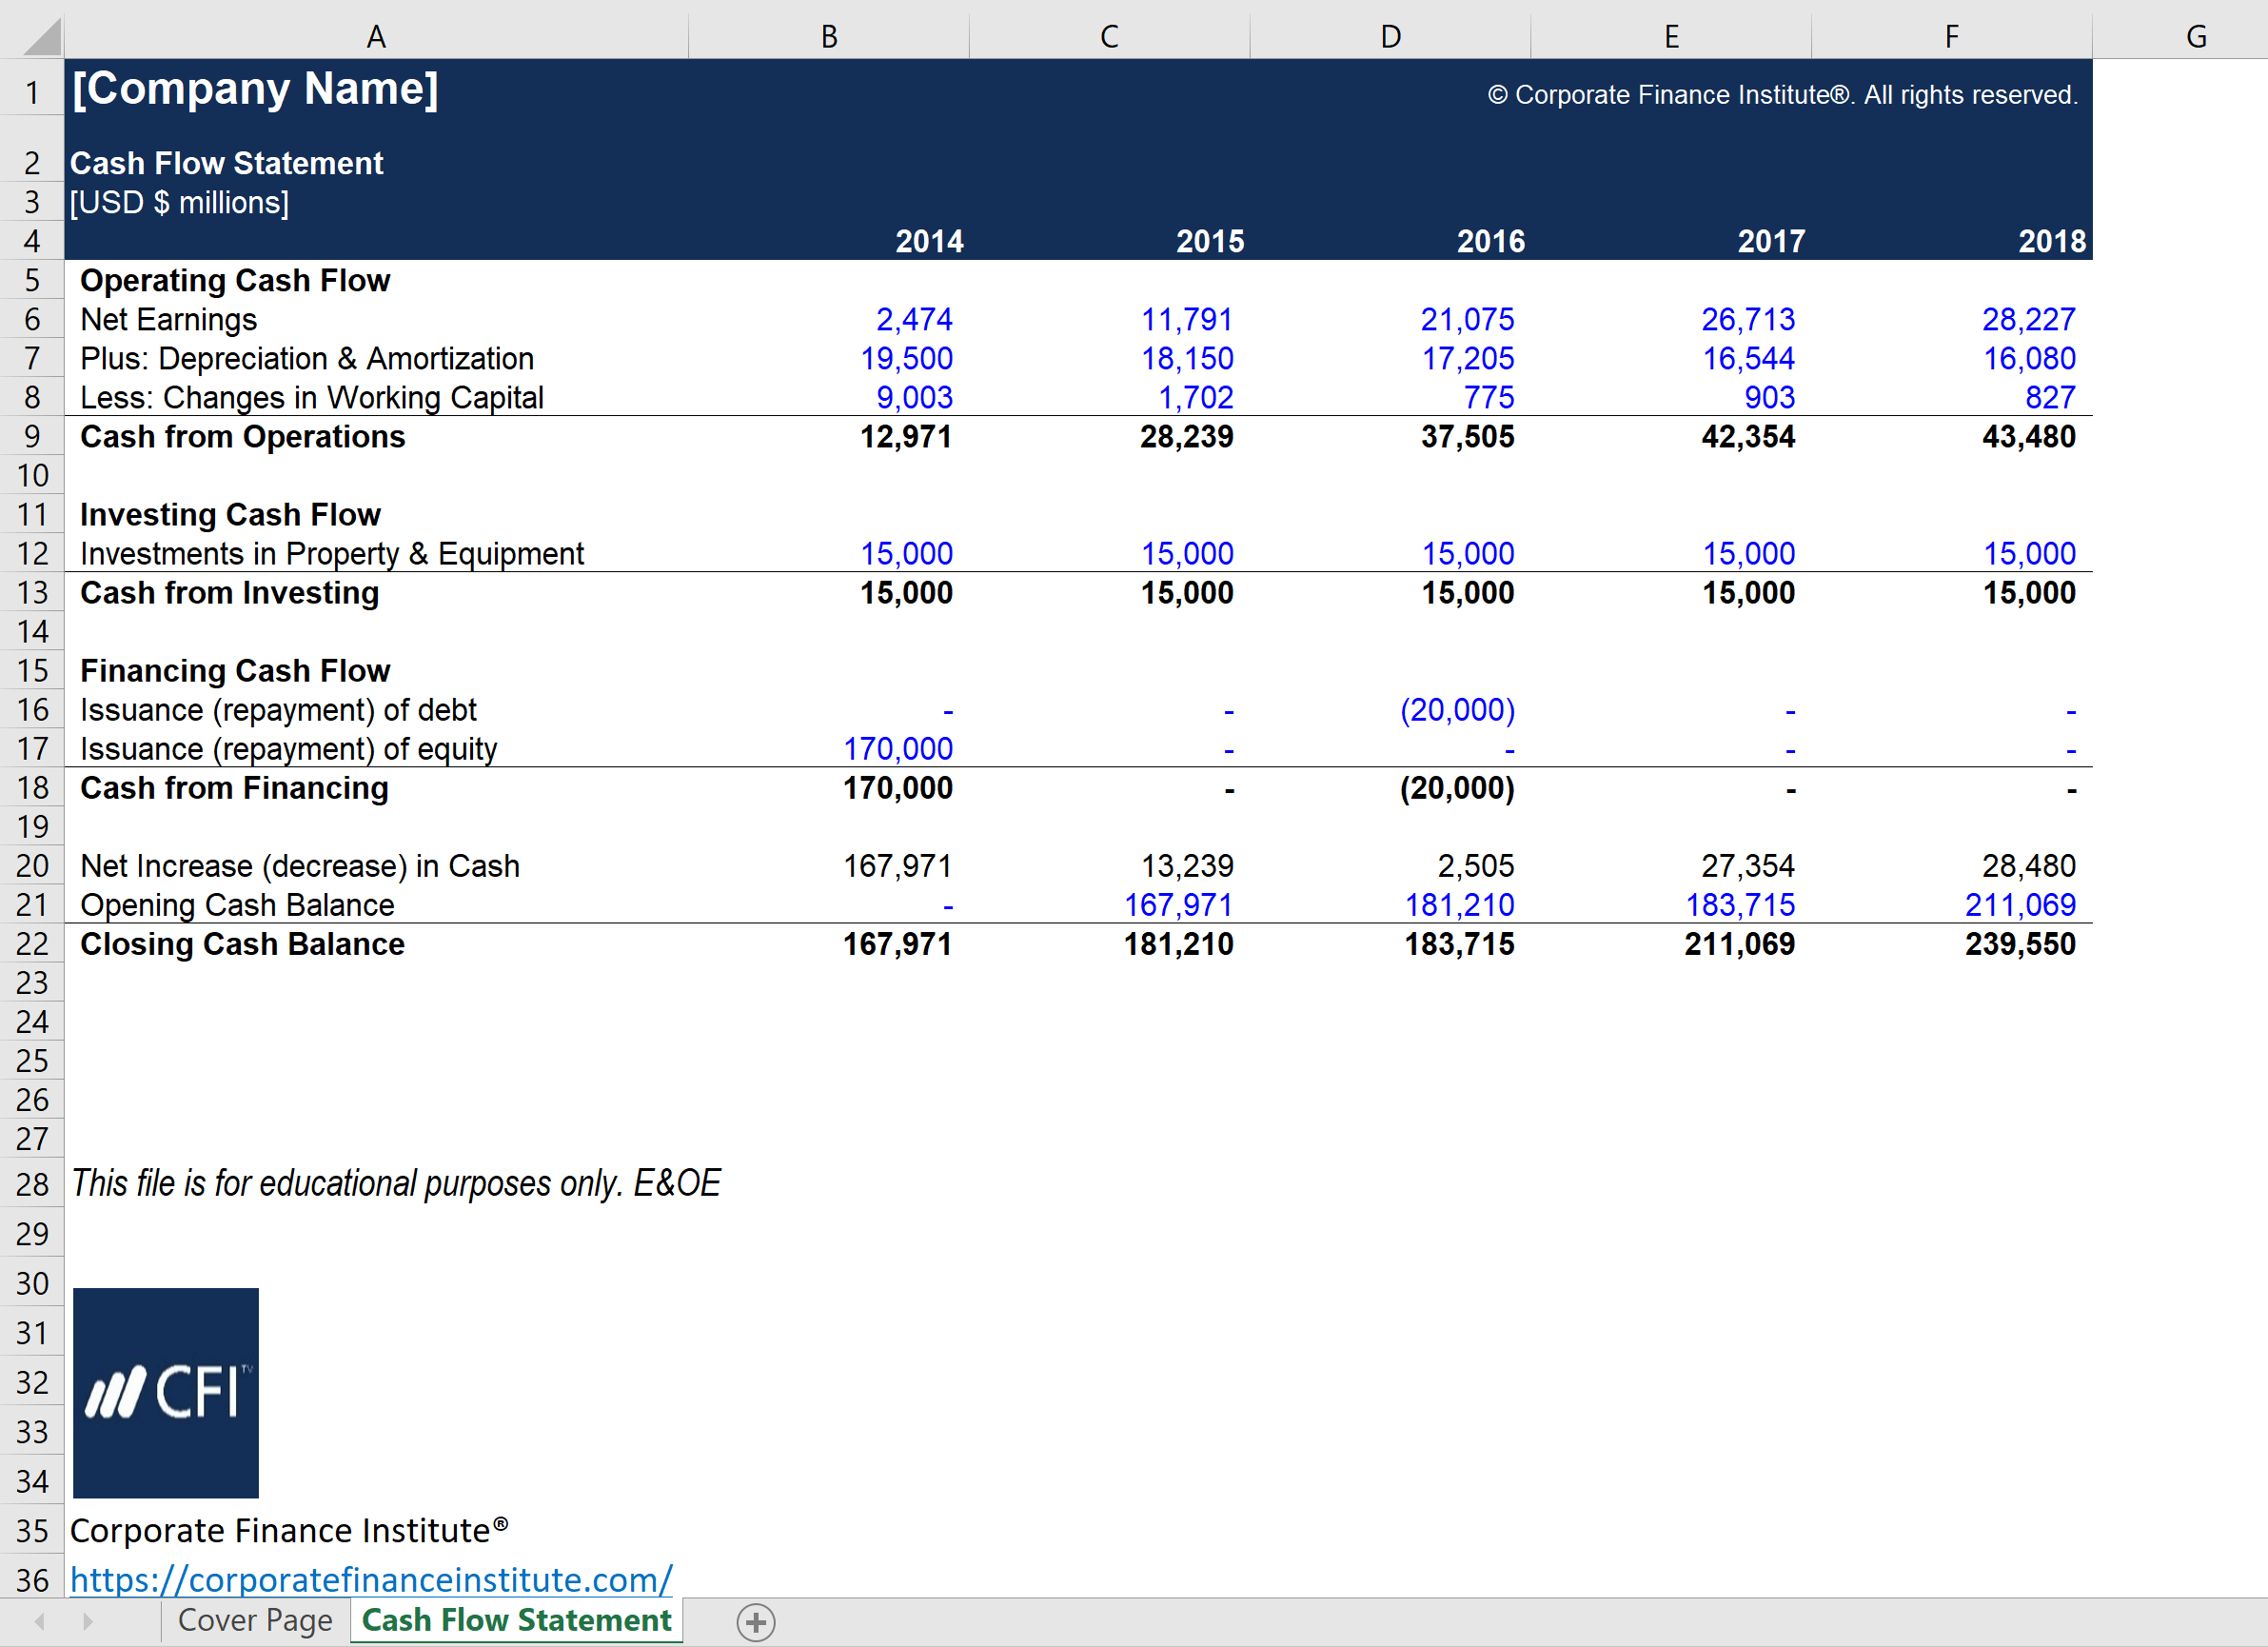 Financial Statements Templates – Download Templates At Cfi Inside Cash Position Report Template